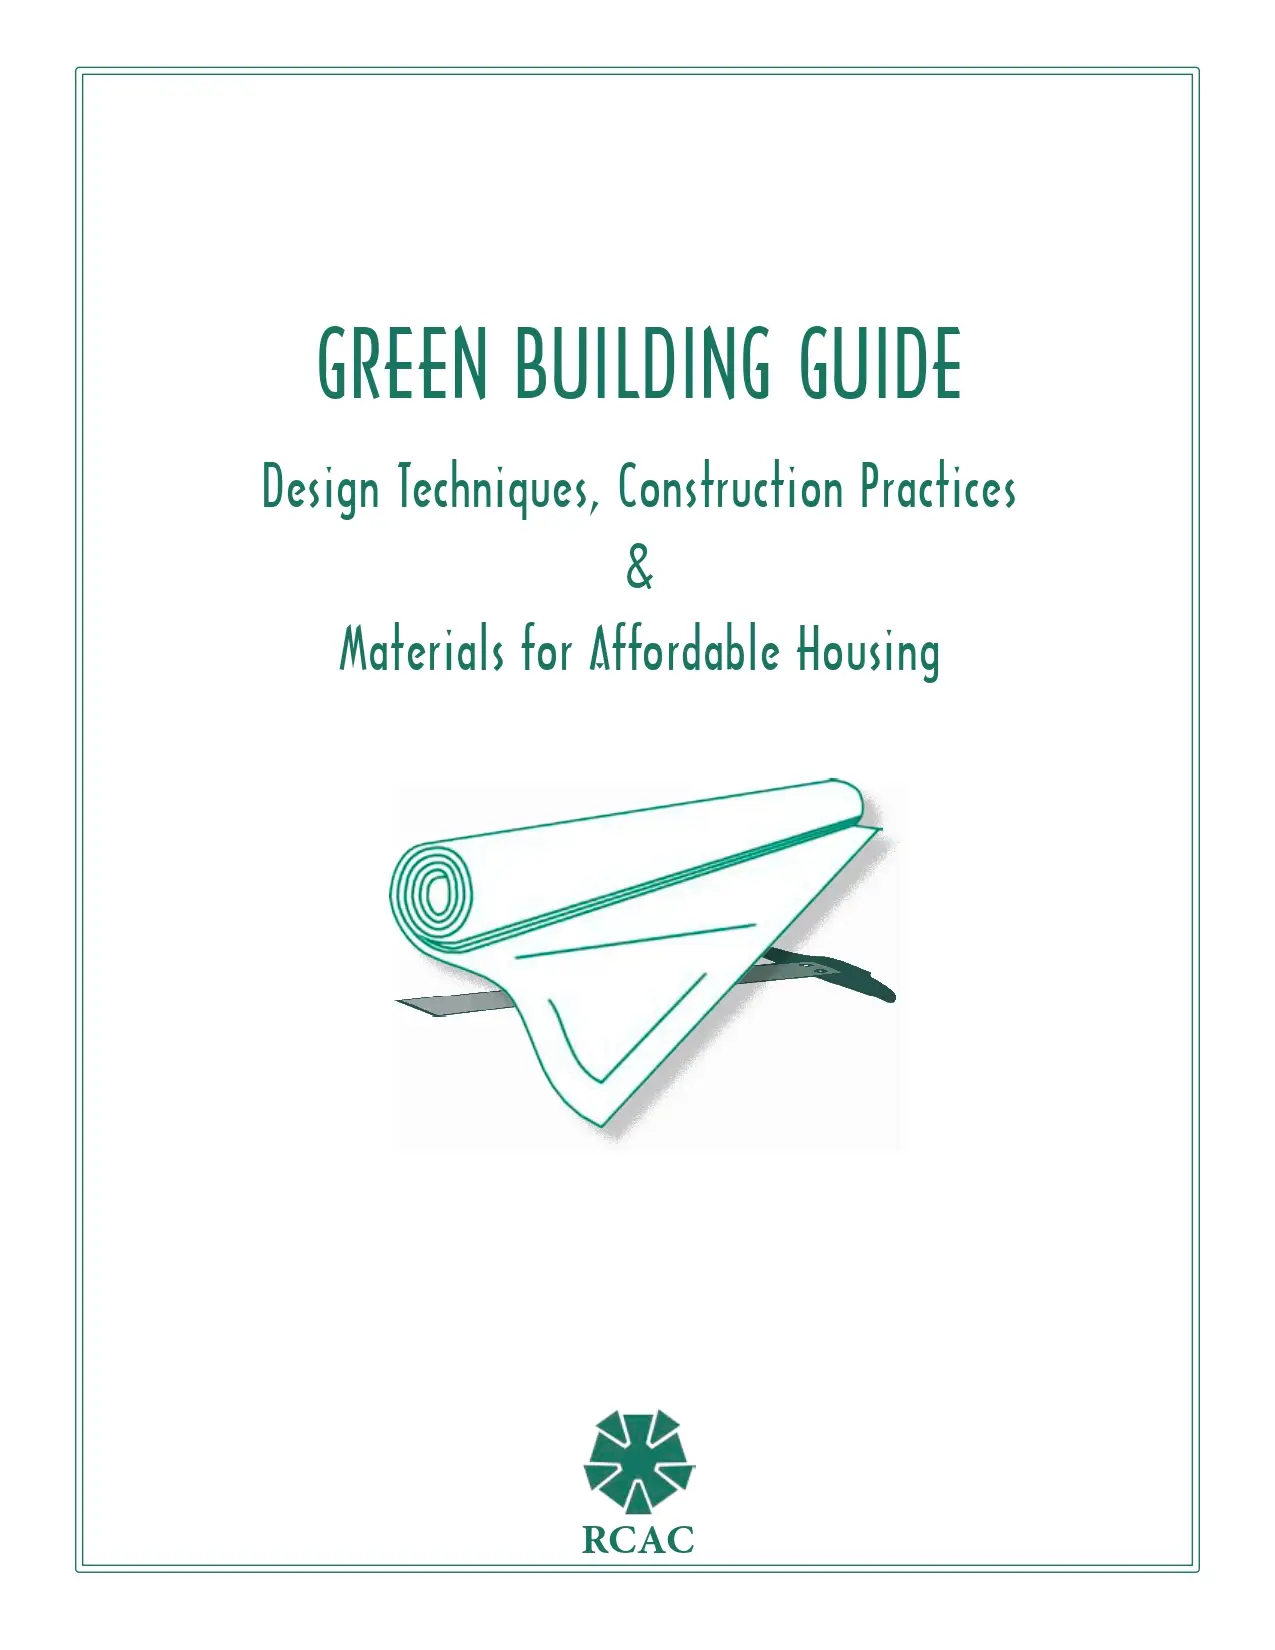 Green Building Guide Design Techniques, Construction Practices & Materials For Affordable Housing